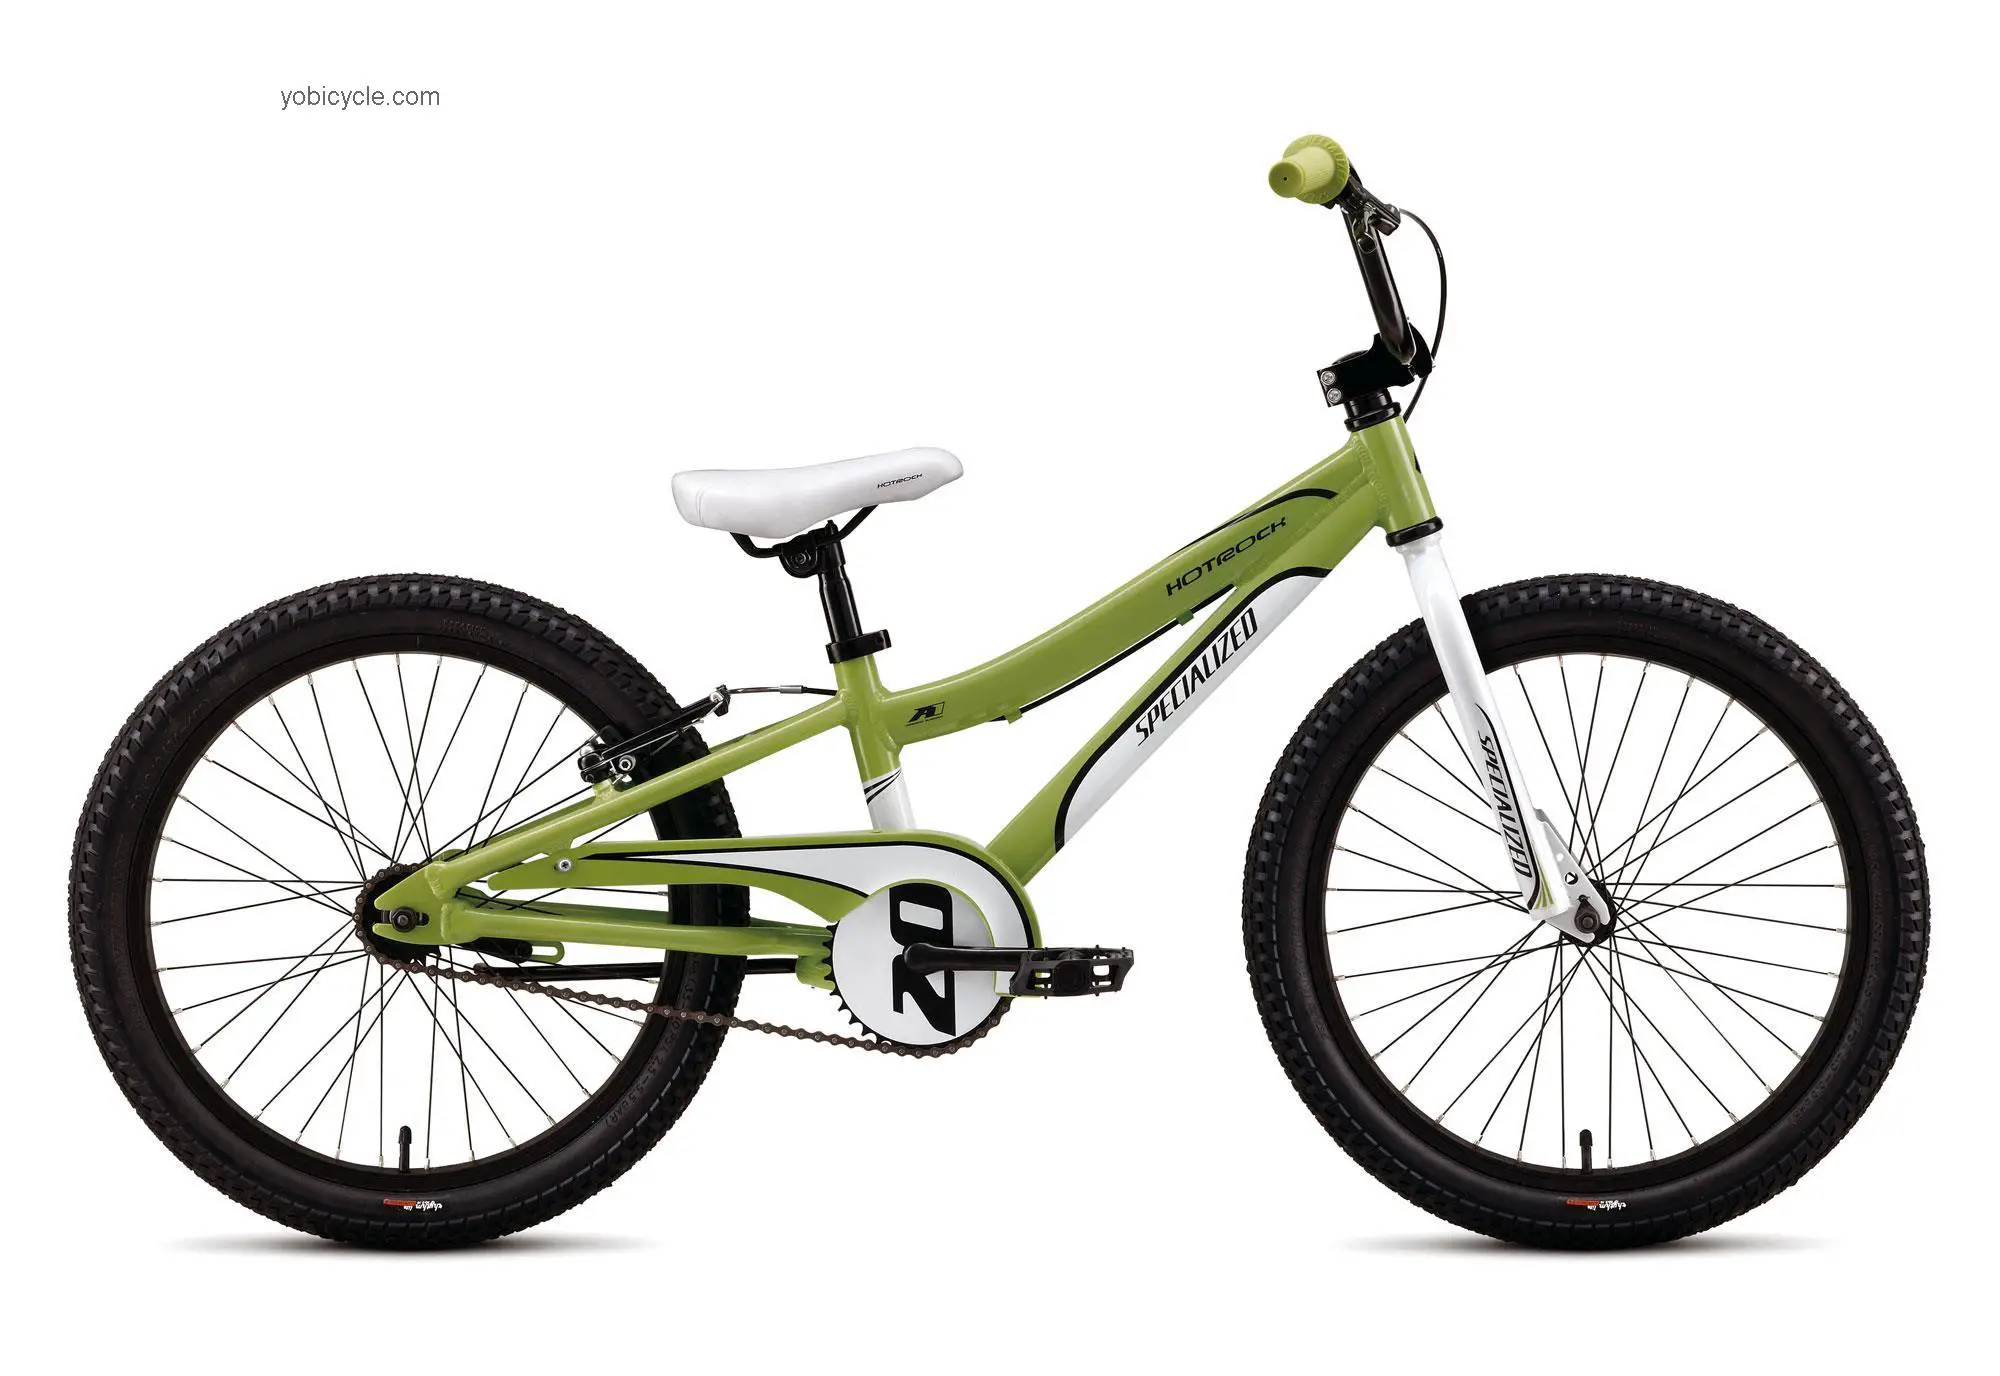 Specialized Hotrock 20 Coaster Boys competitors and comparison tool online specs and performance